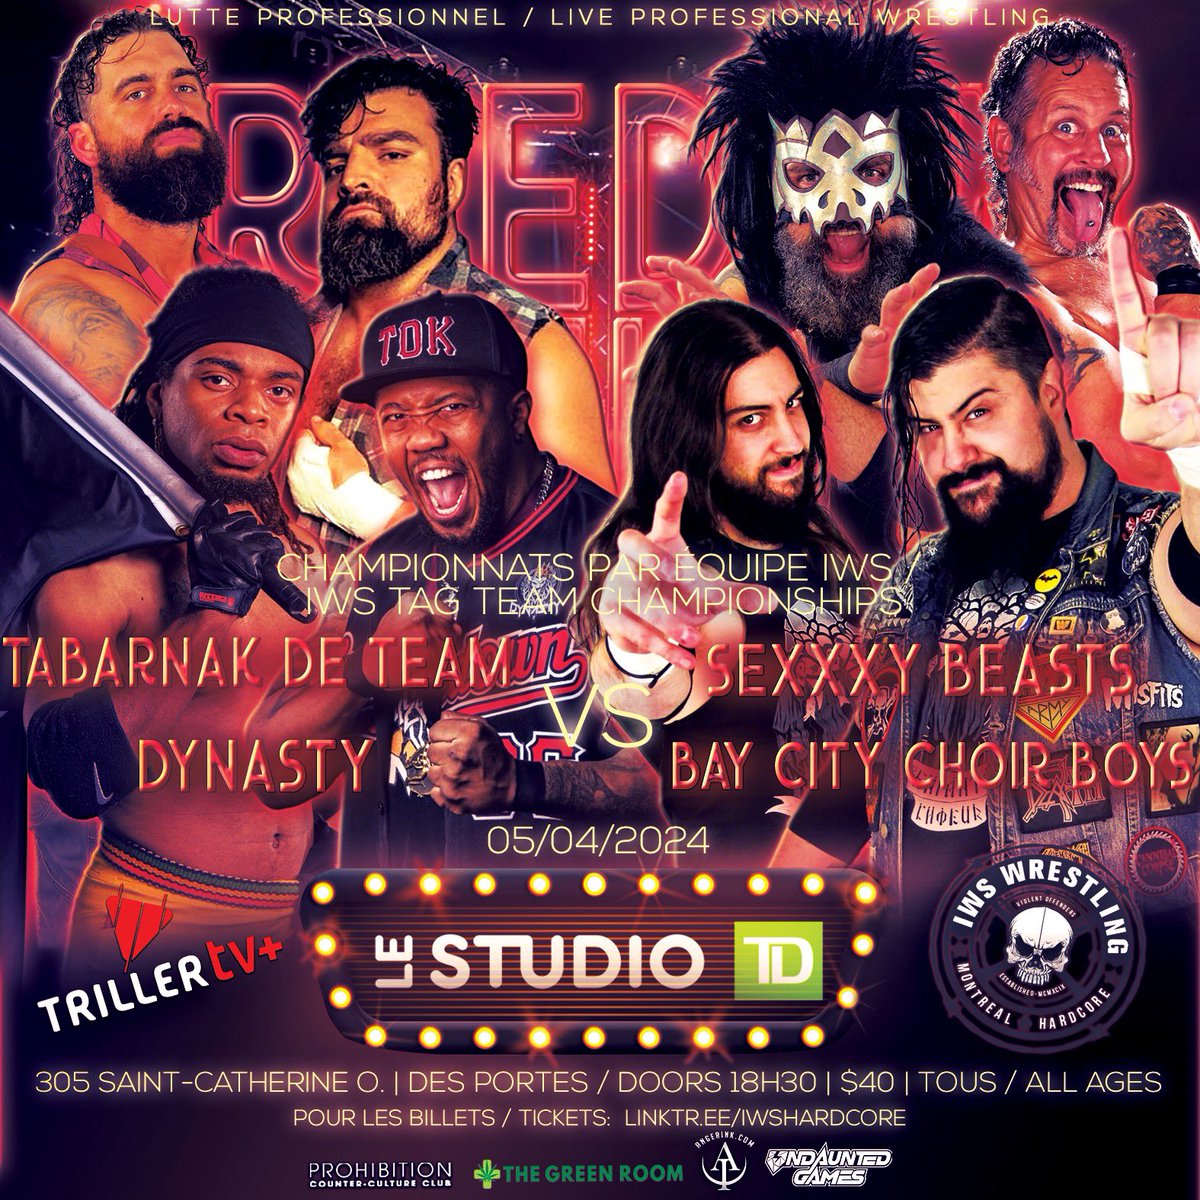 IWS TAG TEAM CHAMPIONSHIP/CHAMPIONNAT PAR ÉQUIPE BAY CITY CHOIR BOYS VS SEXXXY BEASTS VS DYNASTY VS TDT IWS FREEDOM TO FIGHT 5/4/24 - 40$ - Tous ages/All ages 🎟️: linktr.ee/iwshardcore Billets disponible maintenant! Tickets on sale now! Or watch live/Ecoute en direct: